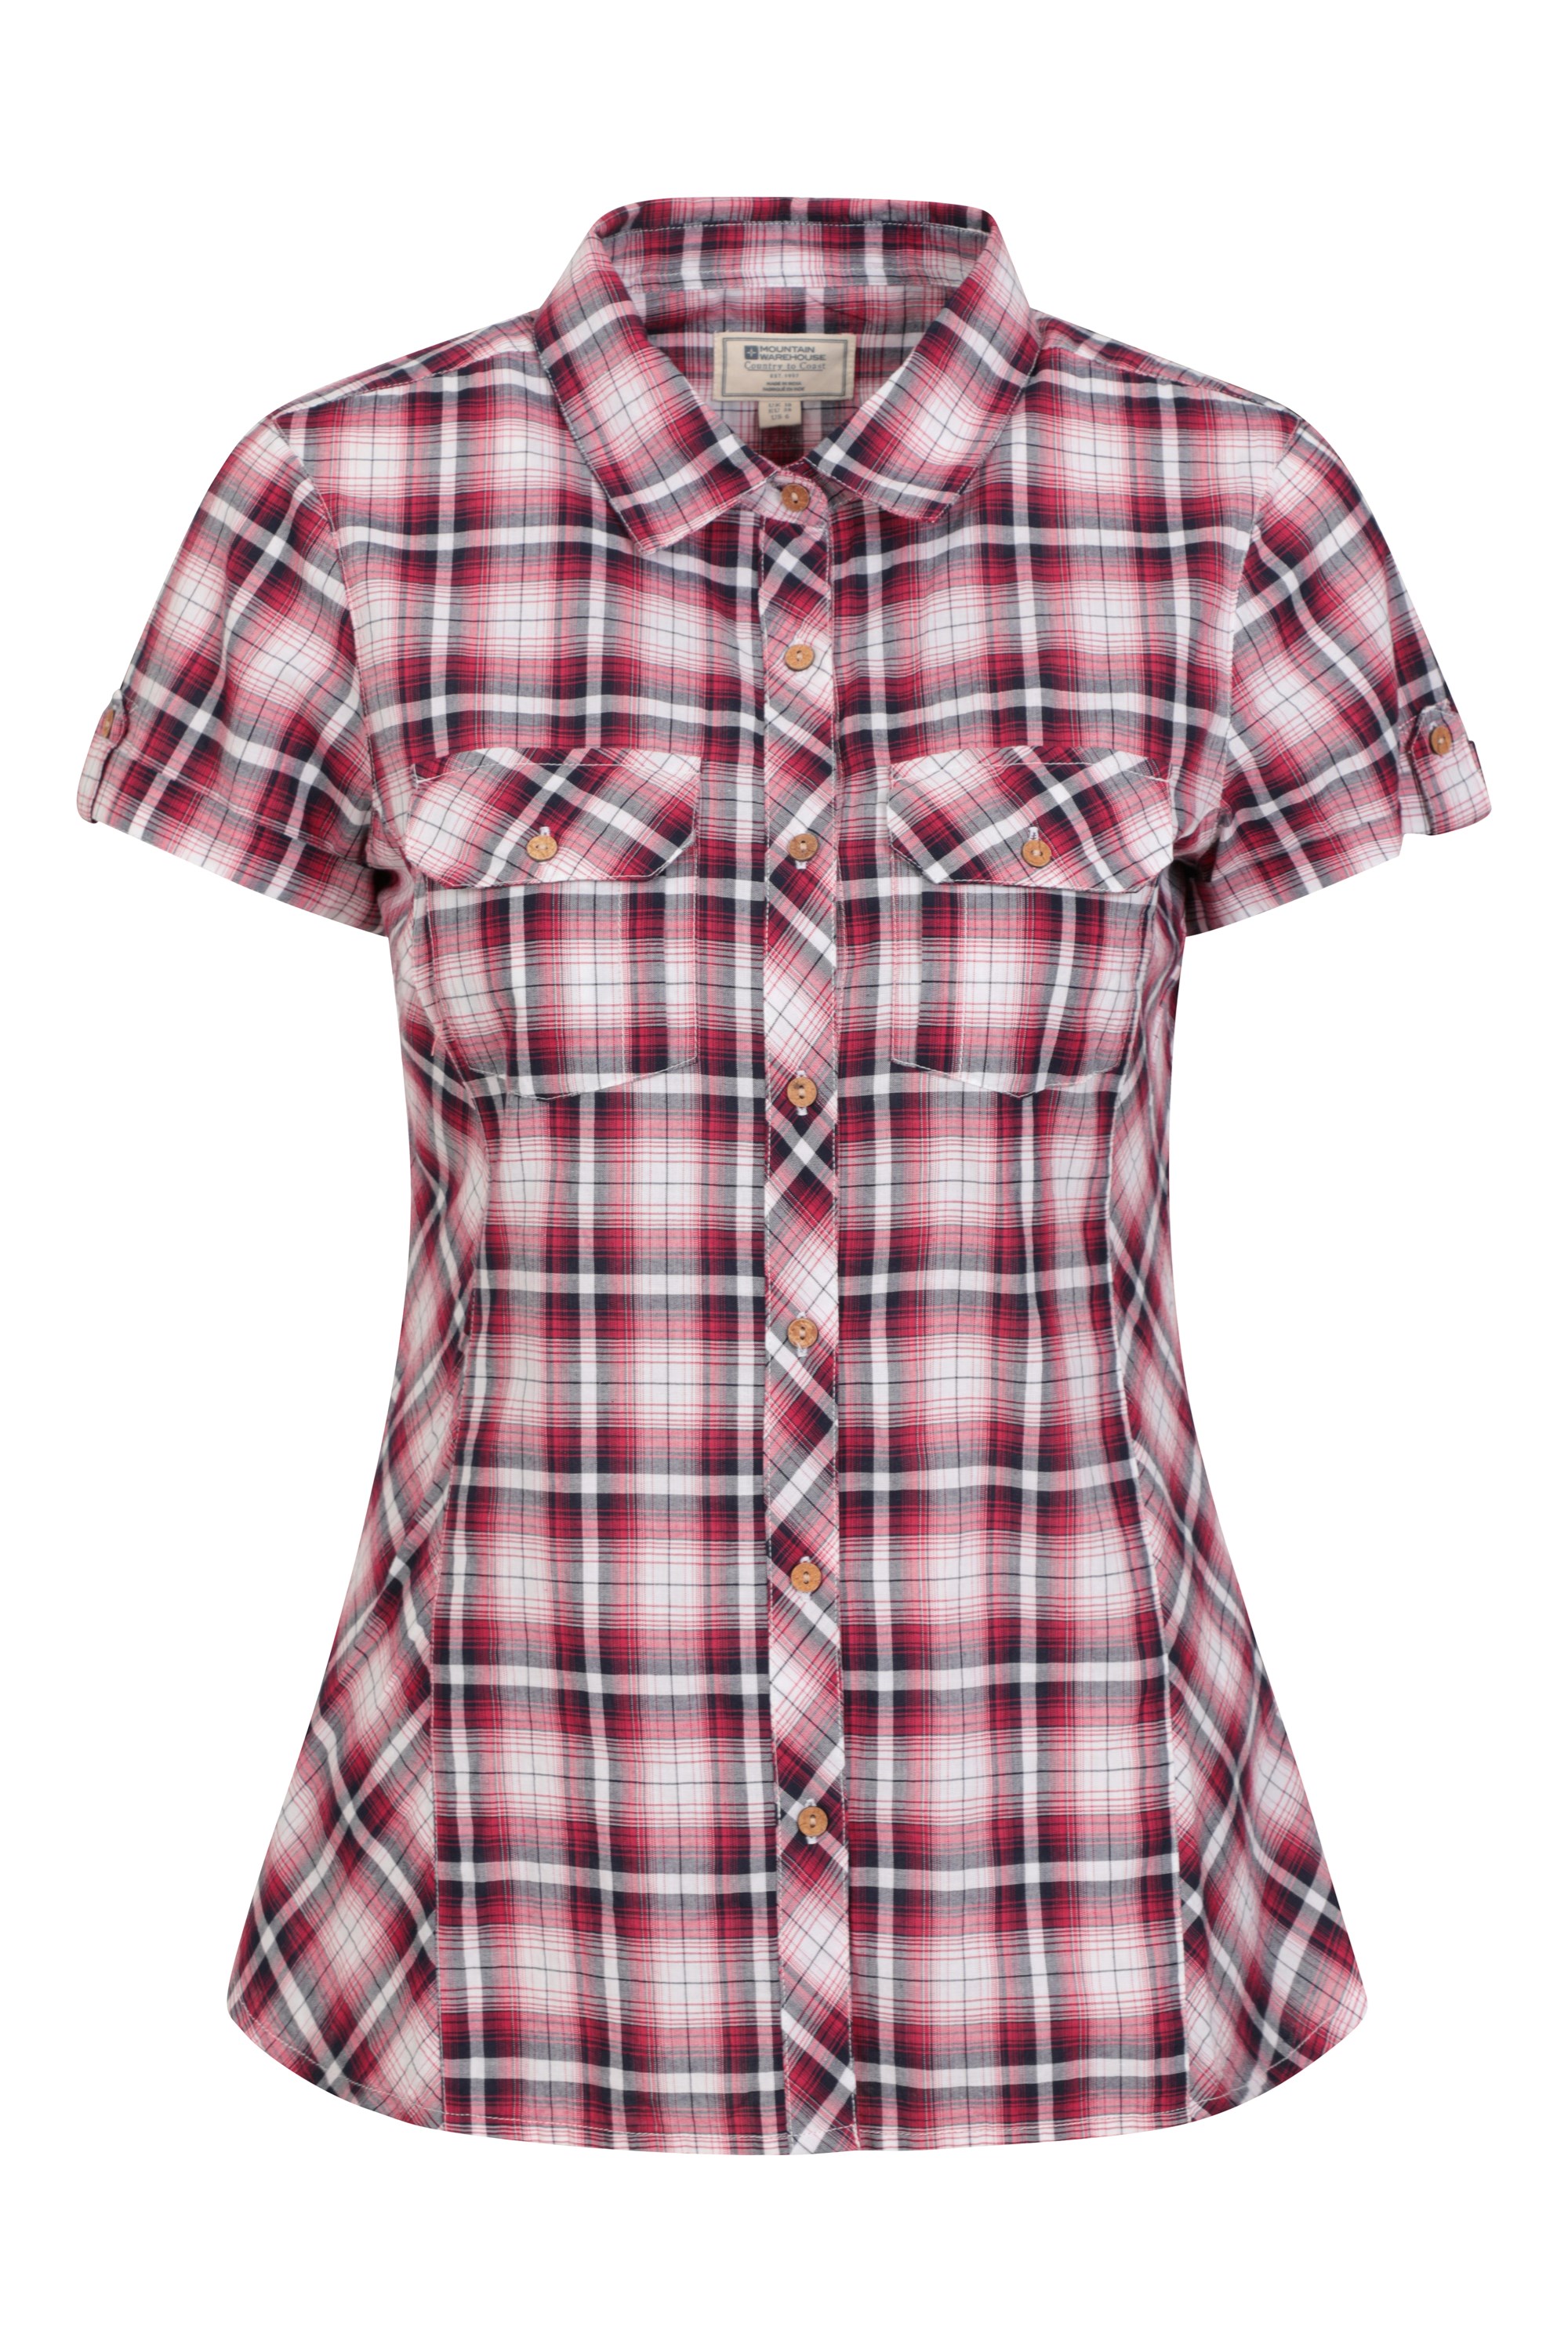 werehouse,Items Under 3 Dollars,Gifts Under 10 Dollars for Women,Pallet,USA  Womens Shirt,Women Tops and Blouses on clearanceladies Short Sleeve